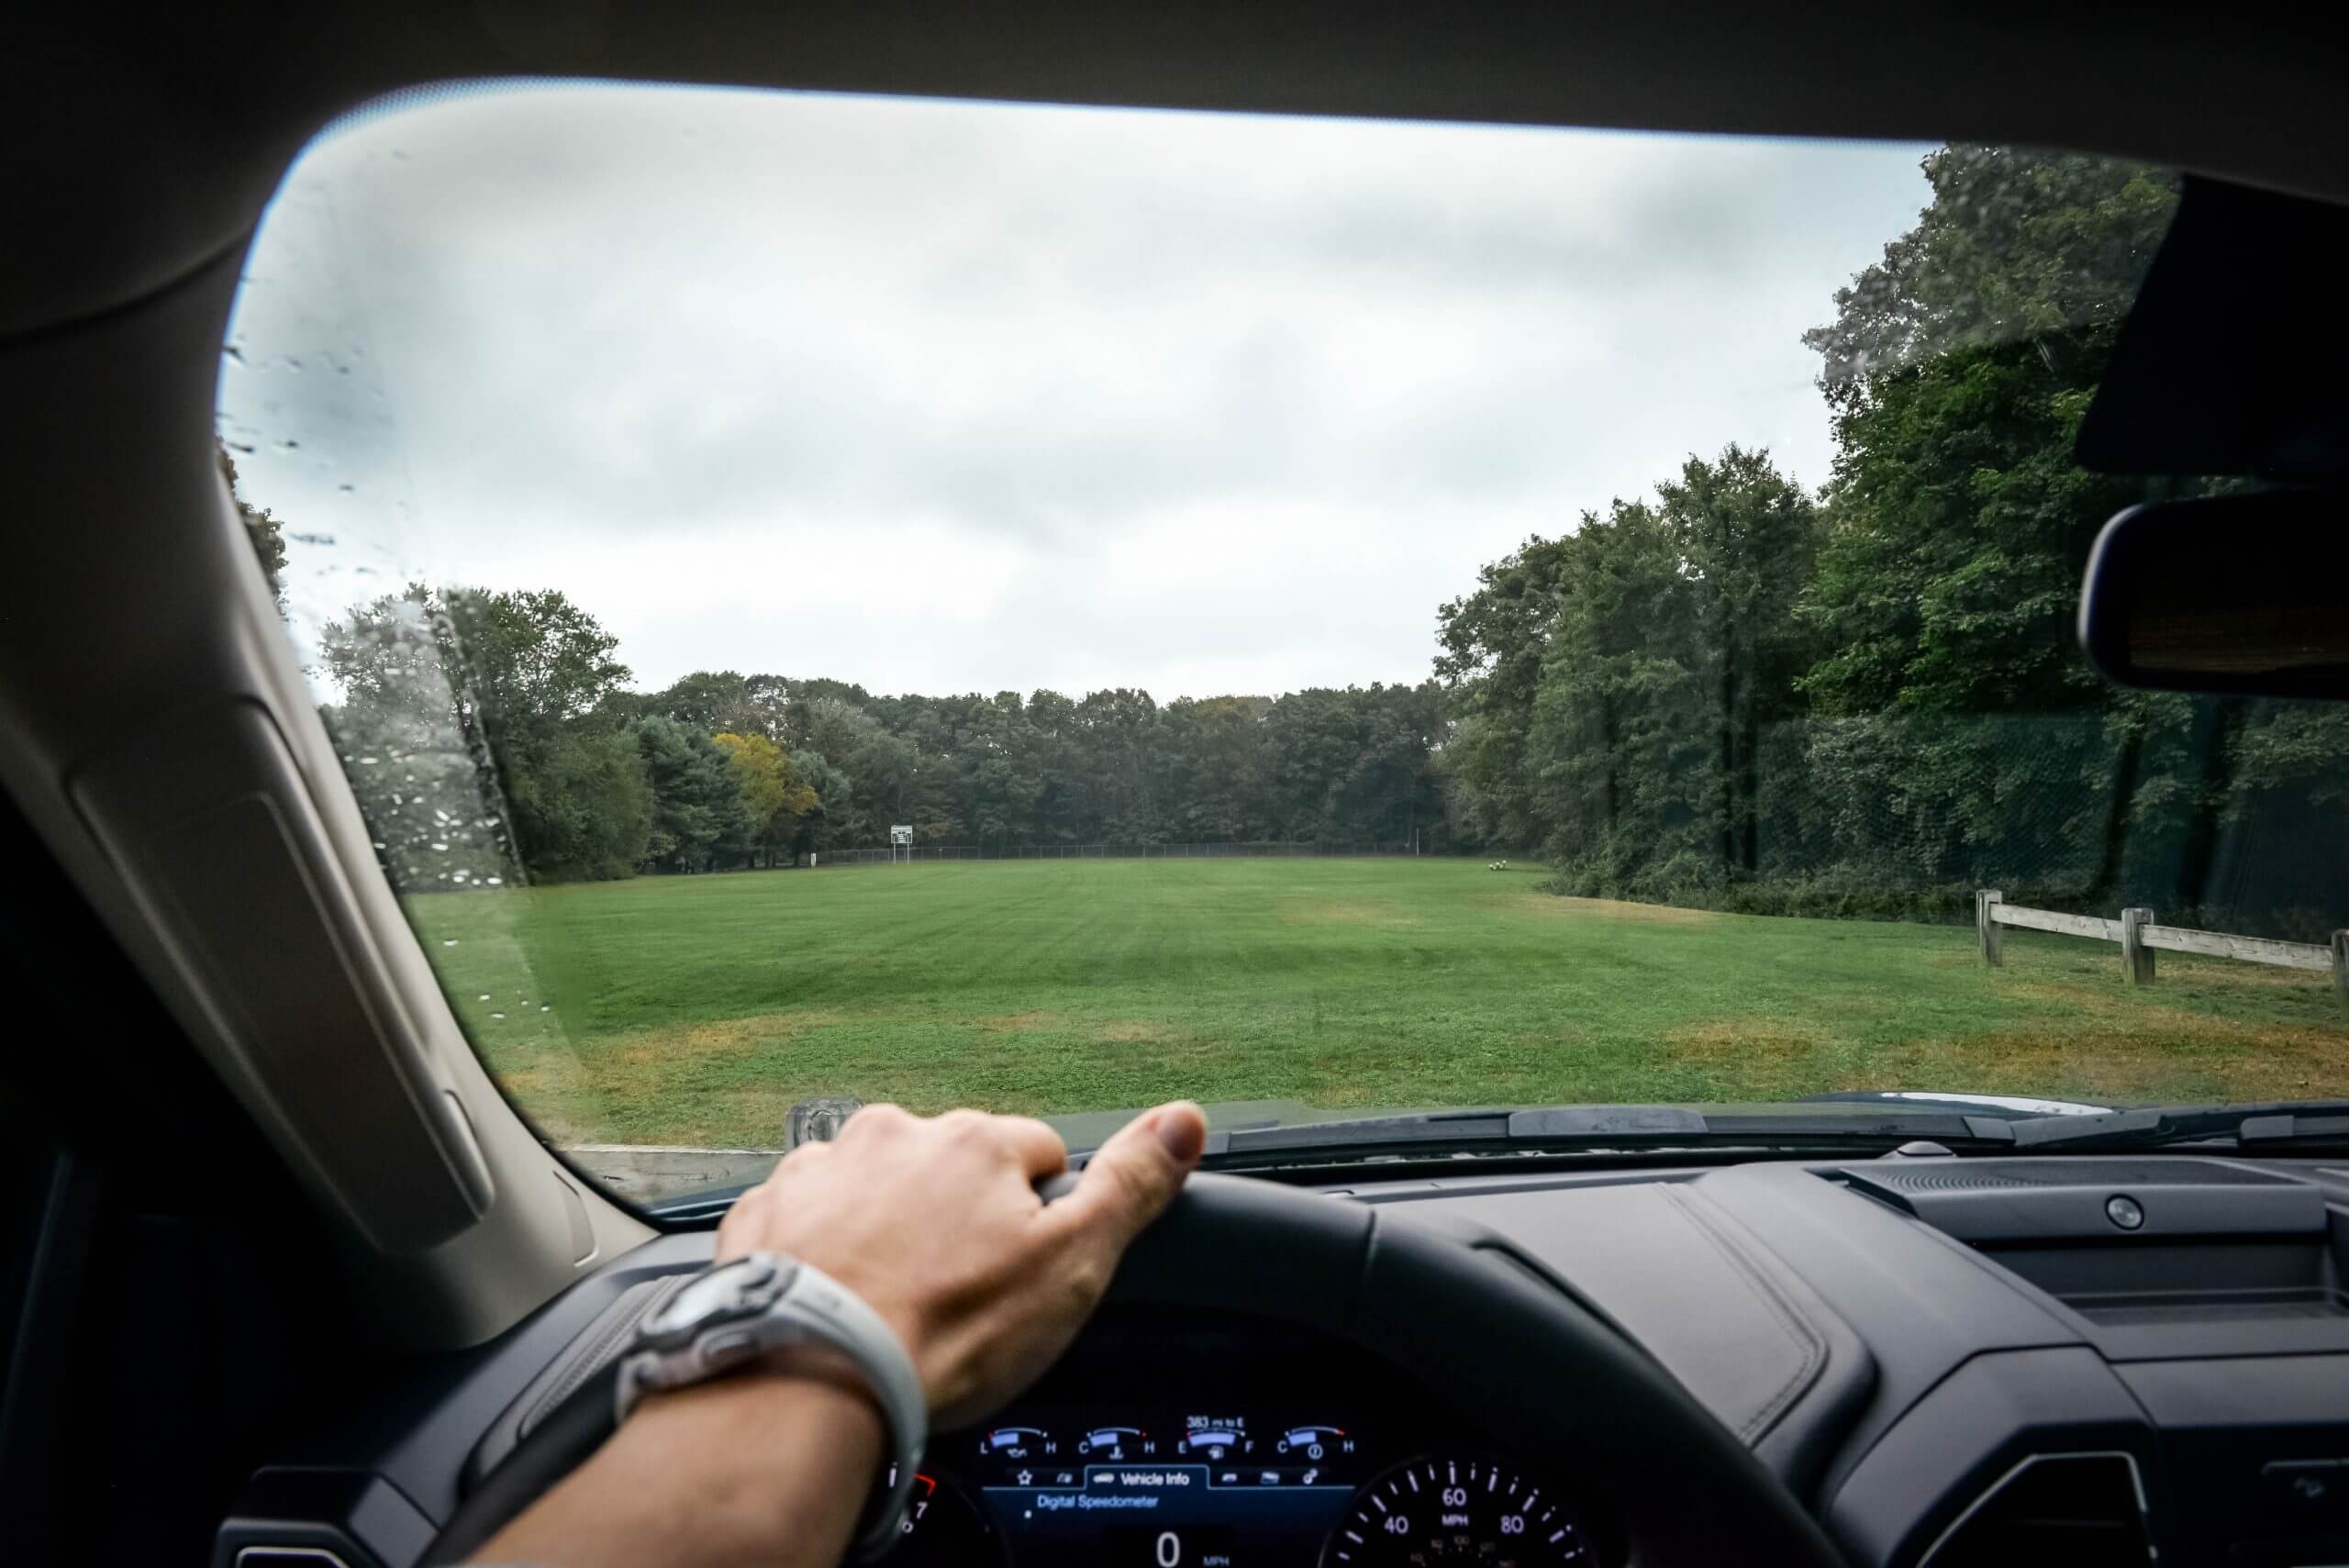 A view from the interior of a vehicle looking forward through the windshield from the driver's side. Outside is a field surrounded by trees.